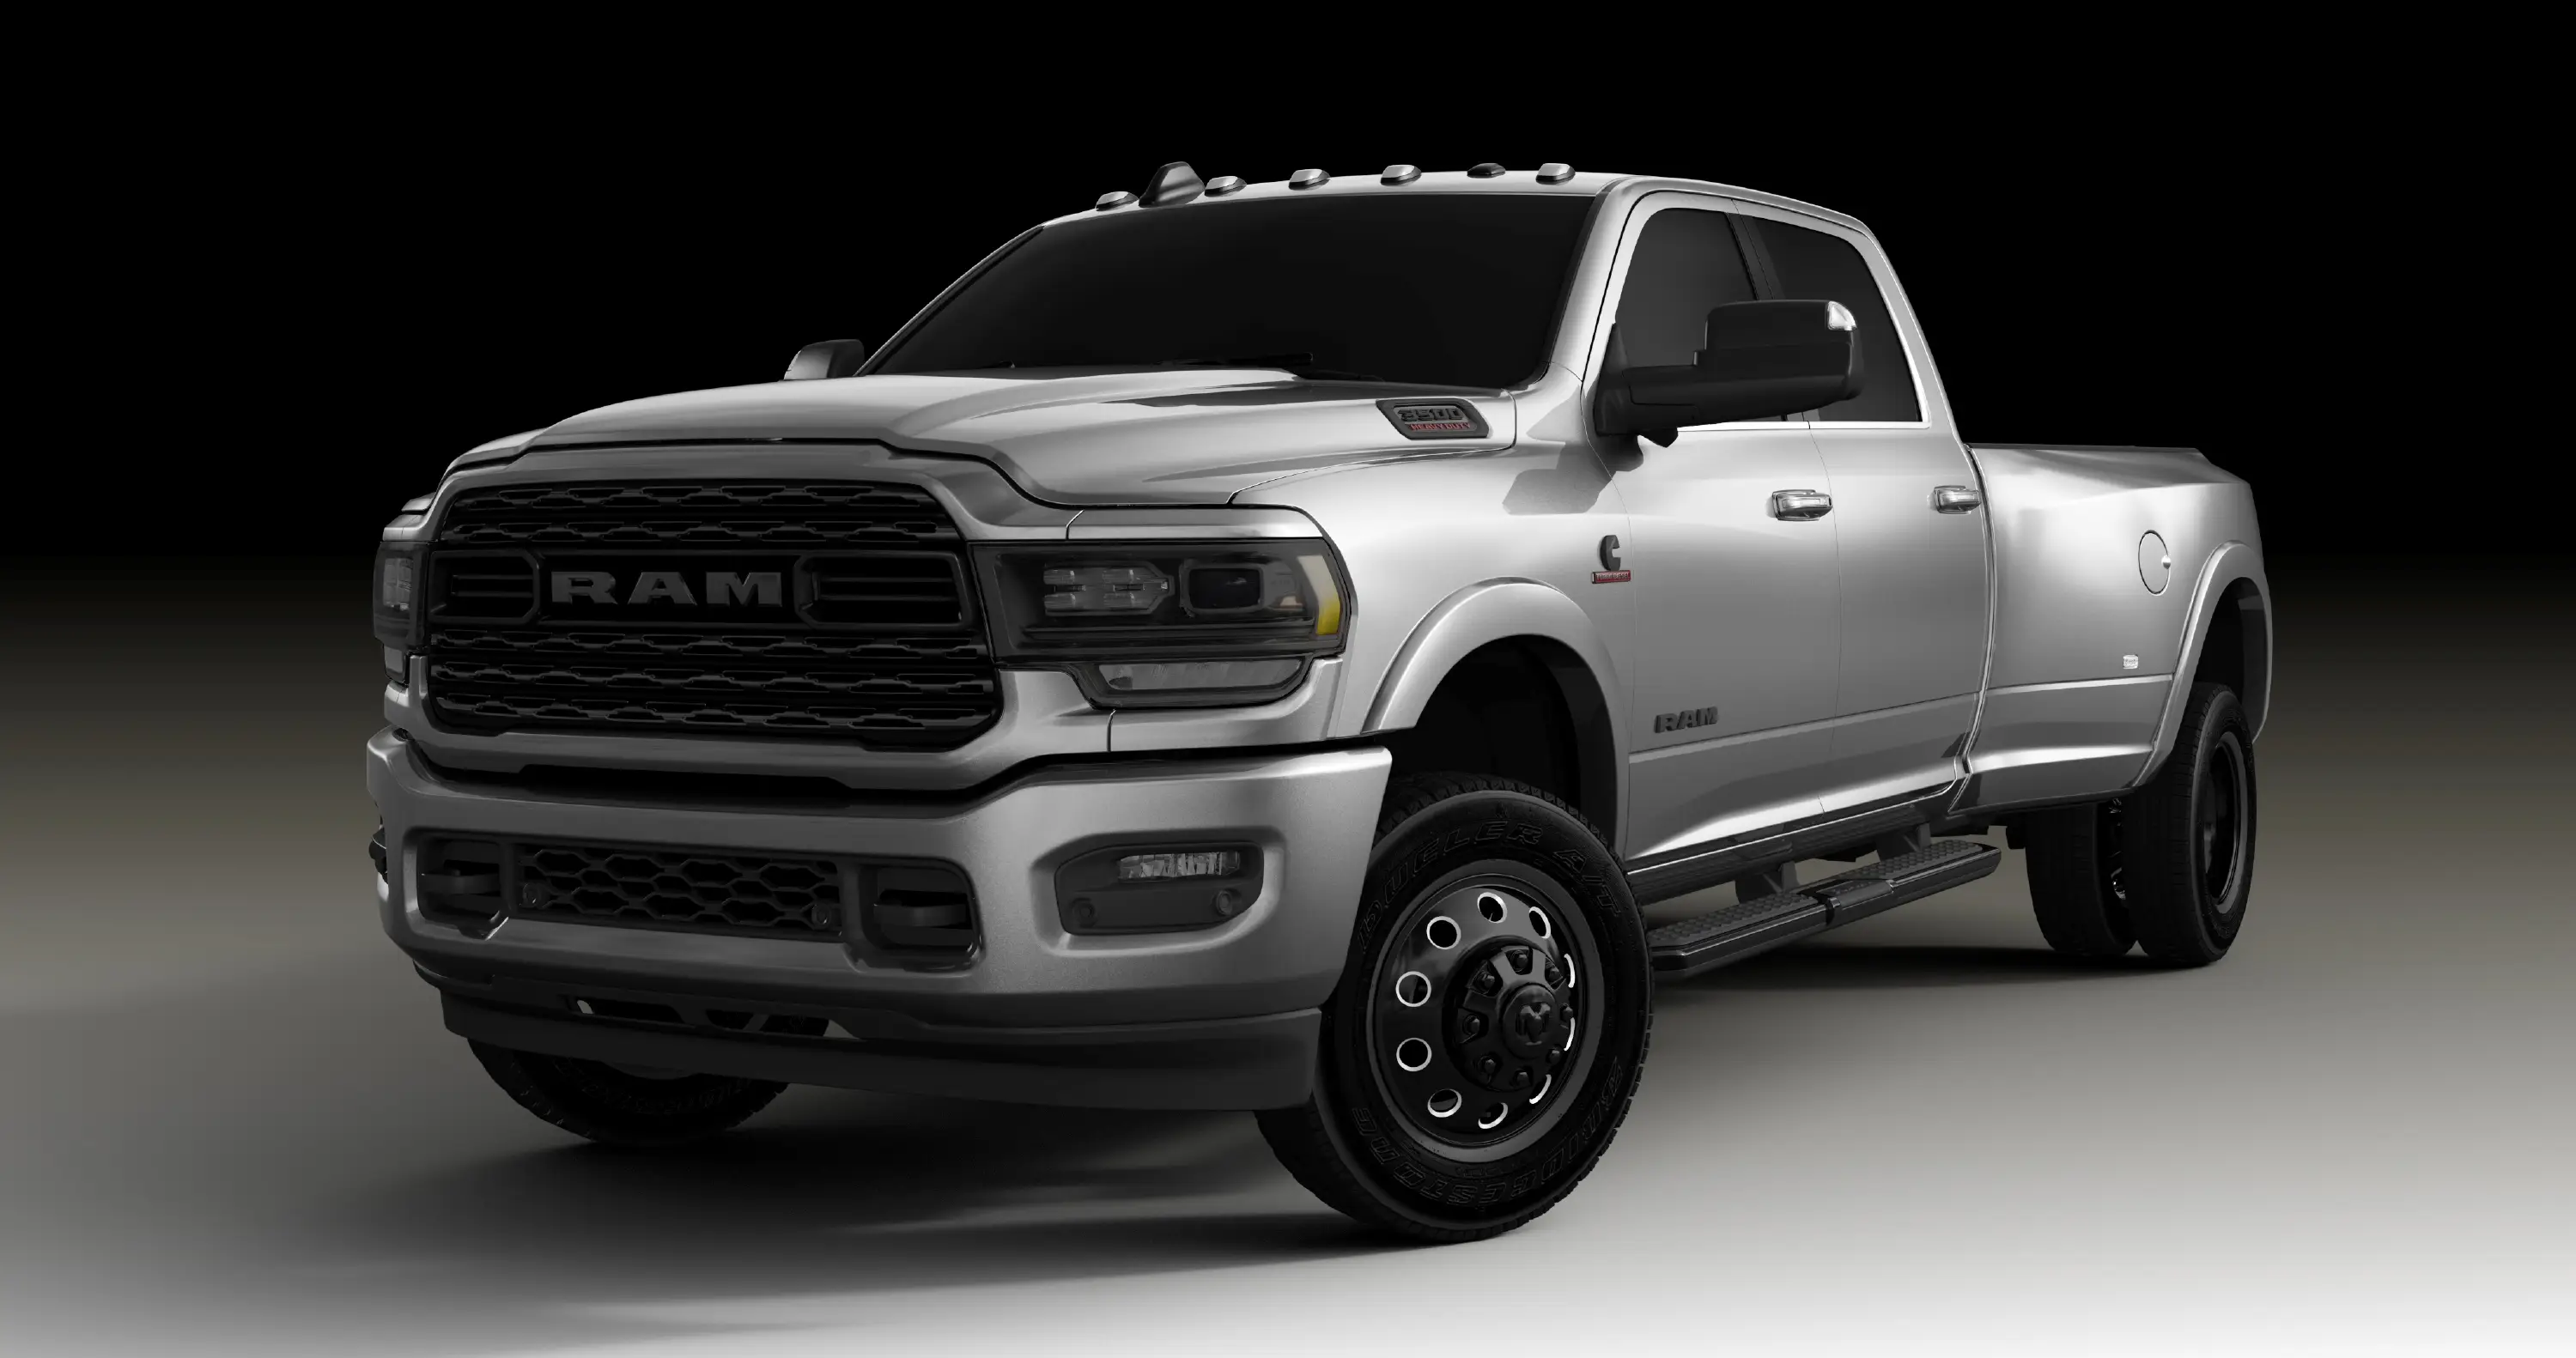 New Ram Heavy Duty Night Editions Unveiled at State Fair of Texa